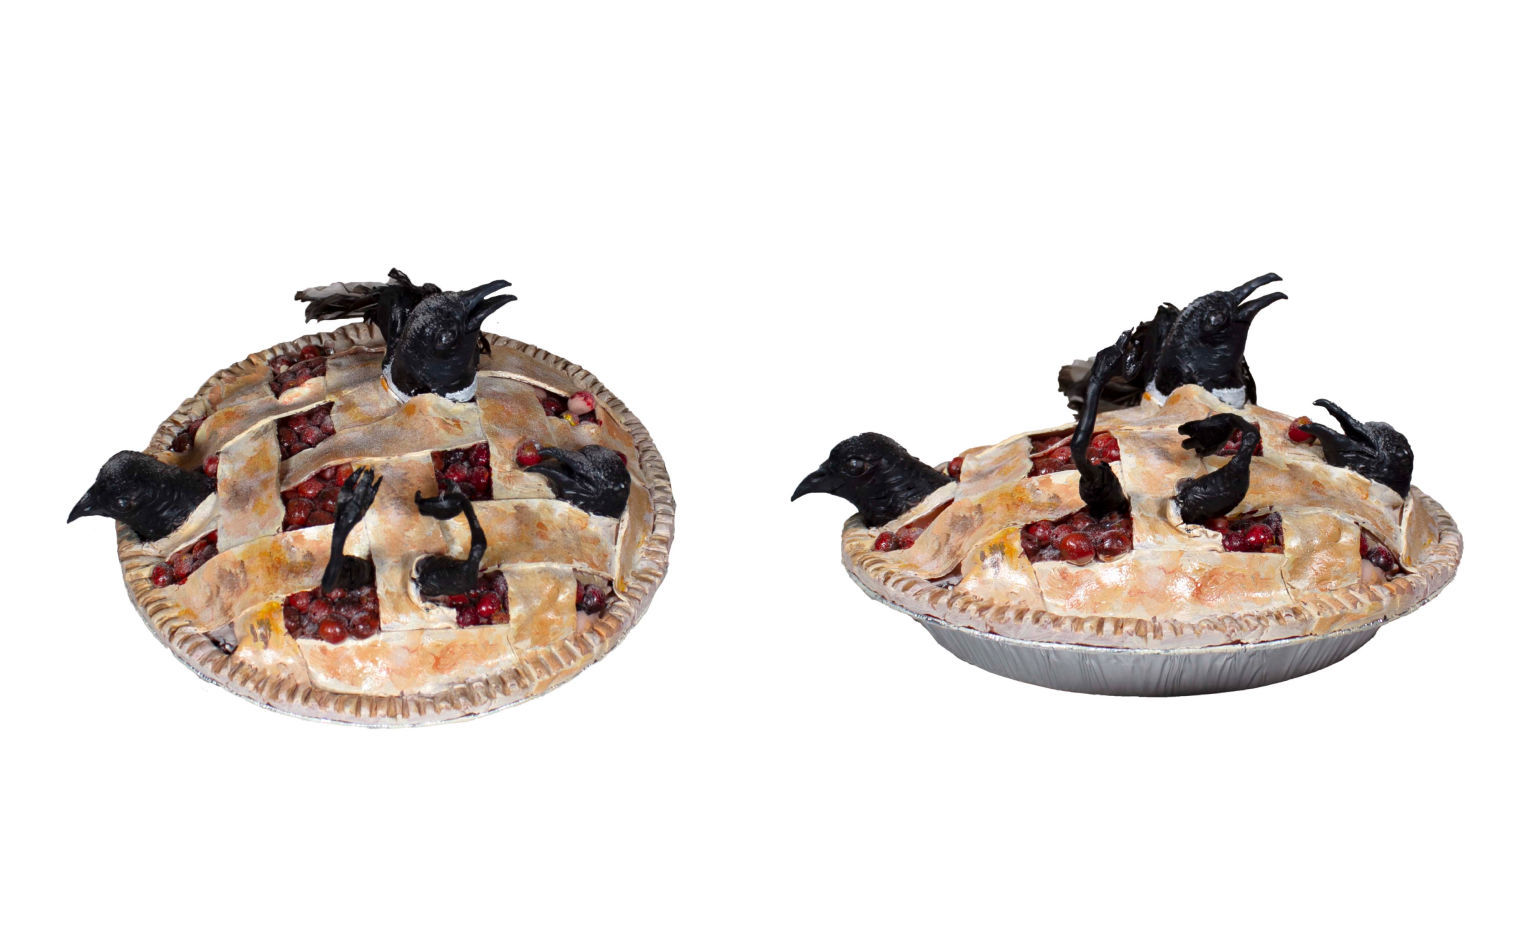 Sculpture of black birds bursting out of a pie with a lattice top.